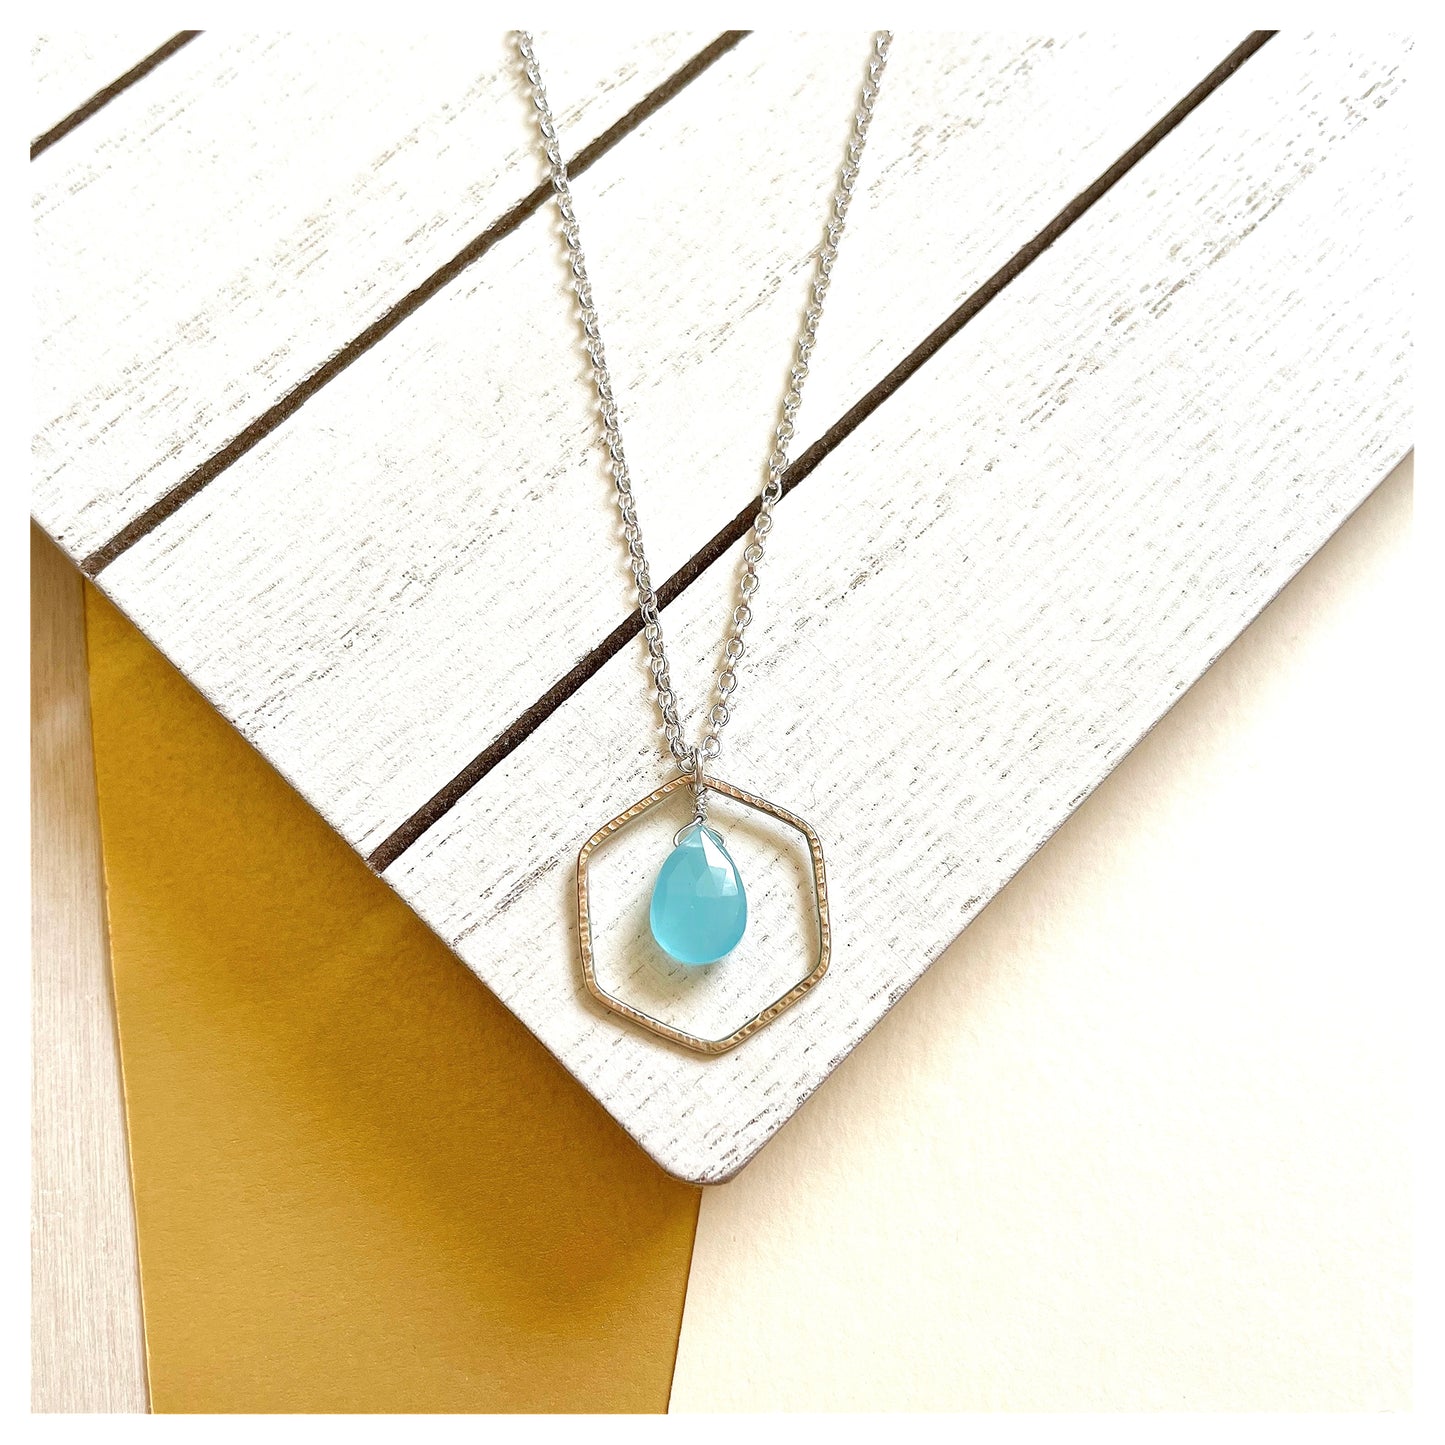 9ct Yellow Gold Hammered Hexagon, Sterling Silver and Aqua Chalcedony Briolette Necklace.